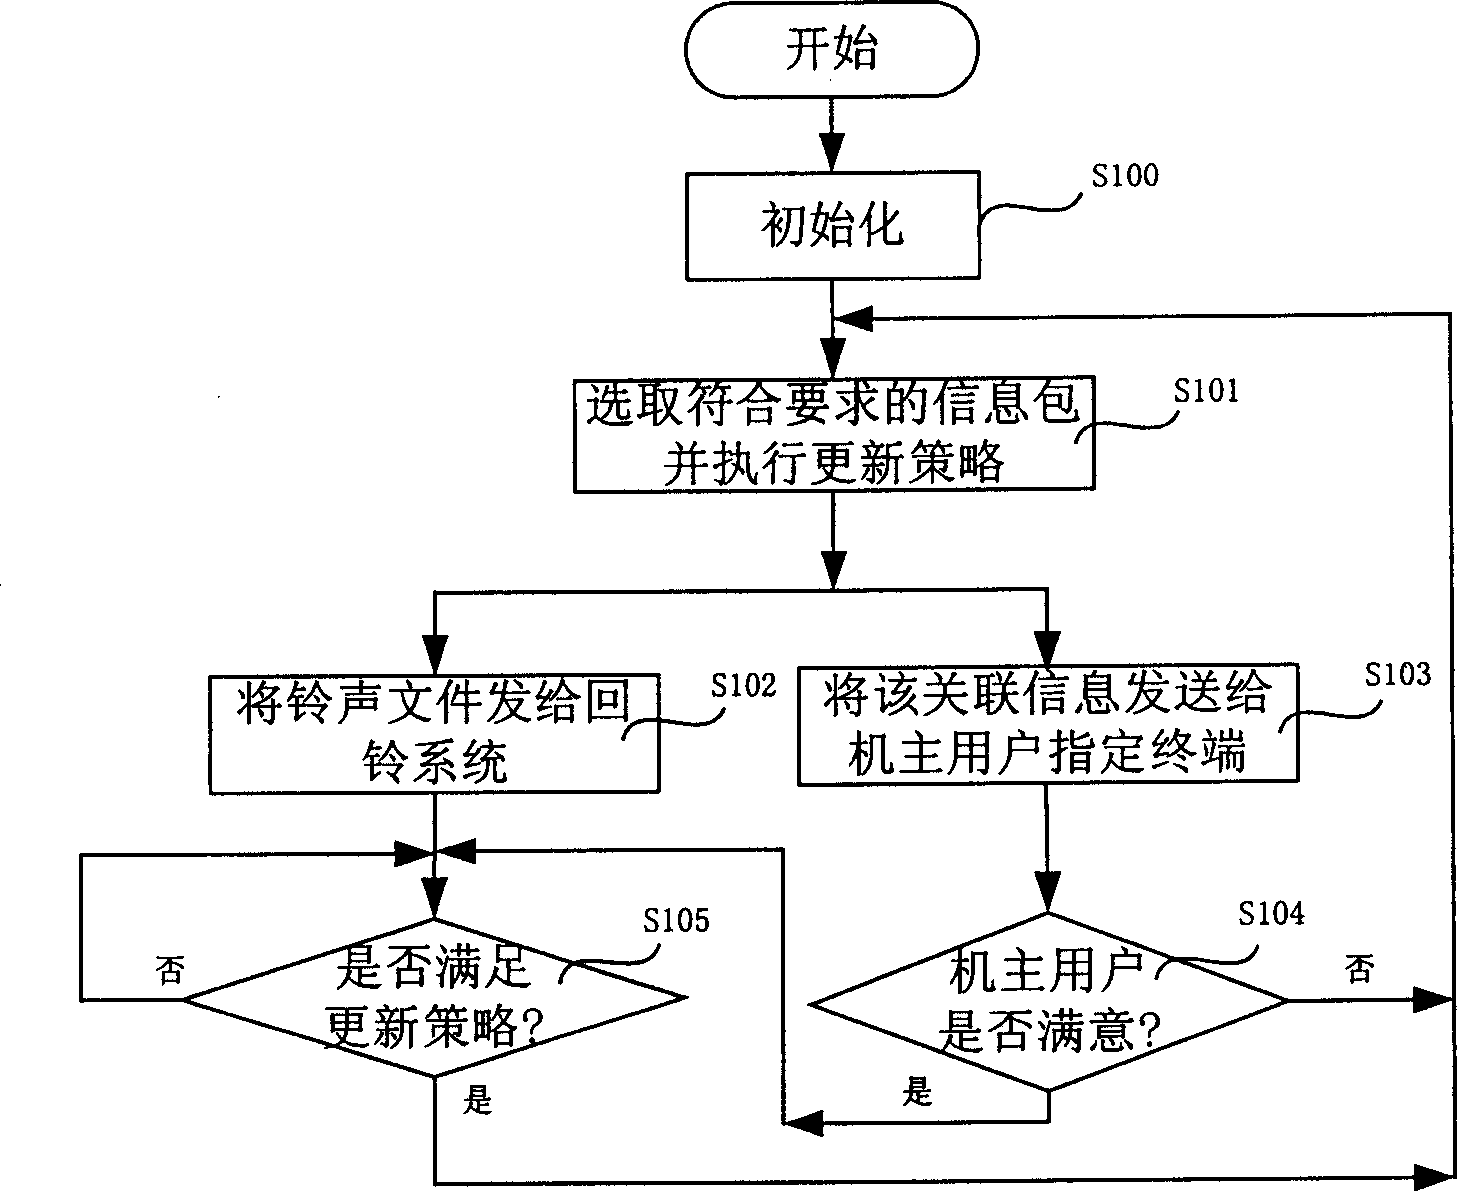 Dynamic information interactive system and method based on personalized ring back tone service